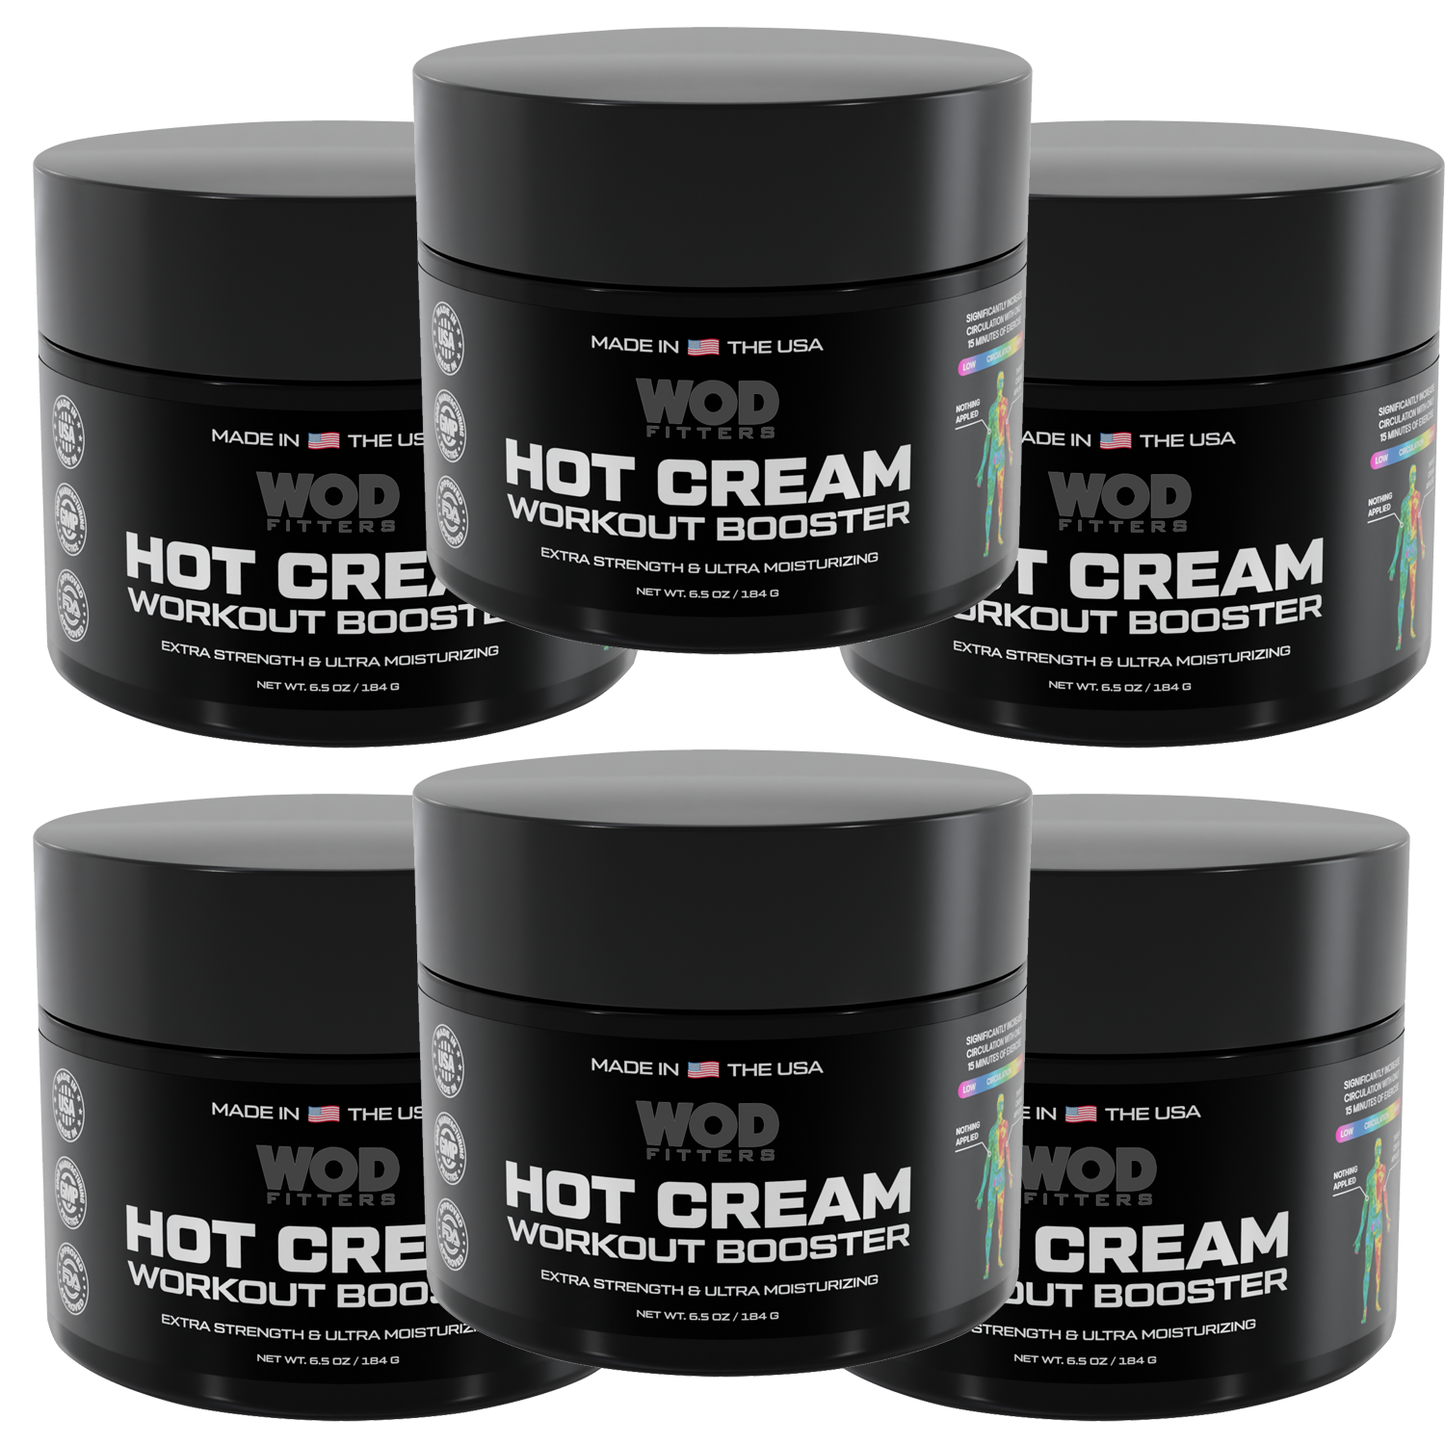 WODFitters Hot Cream Workout Booster for More Efficient Warm Up, Reduced Muscle Soreness and Faster Muscle Recovery - 6.5 oz - Made in the USA